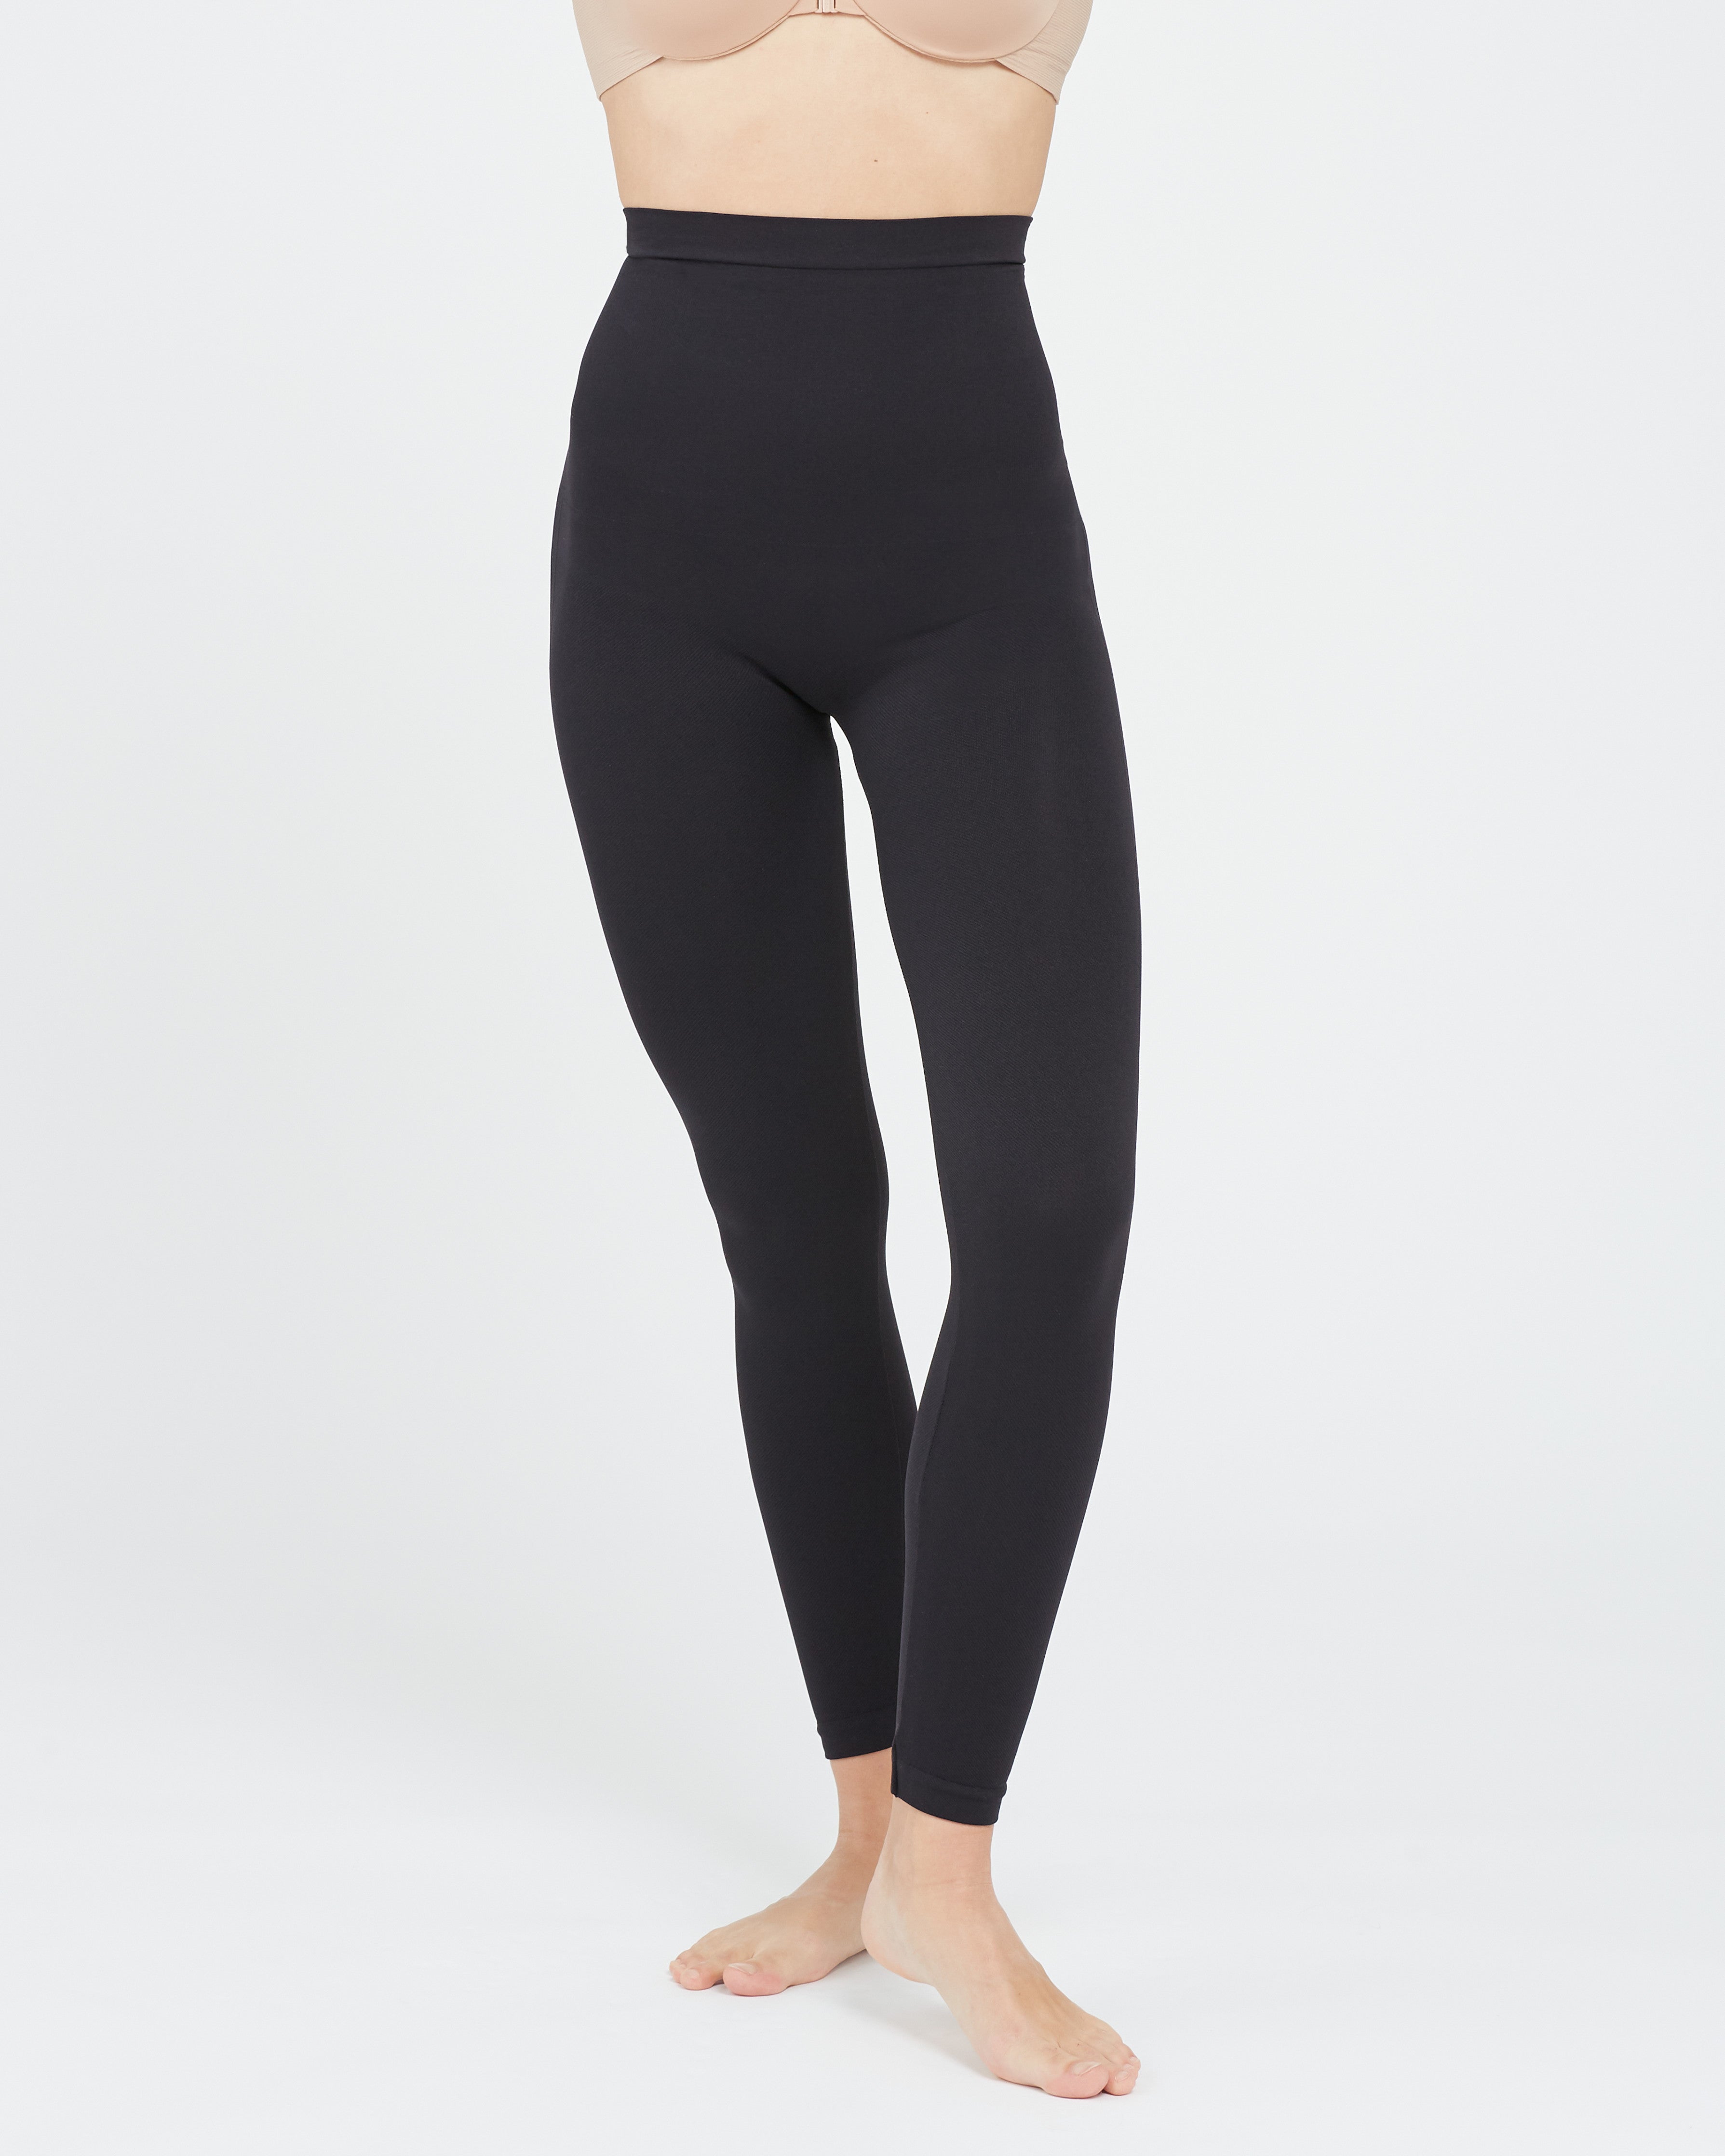 My Orders Placed My Account Leggings for Women Tummy Control